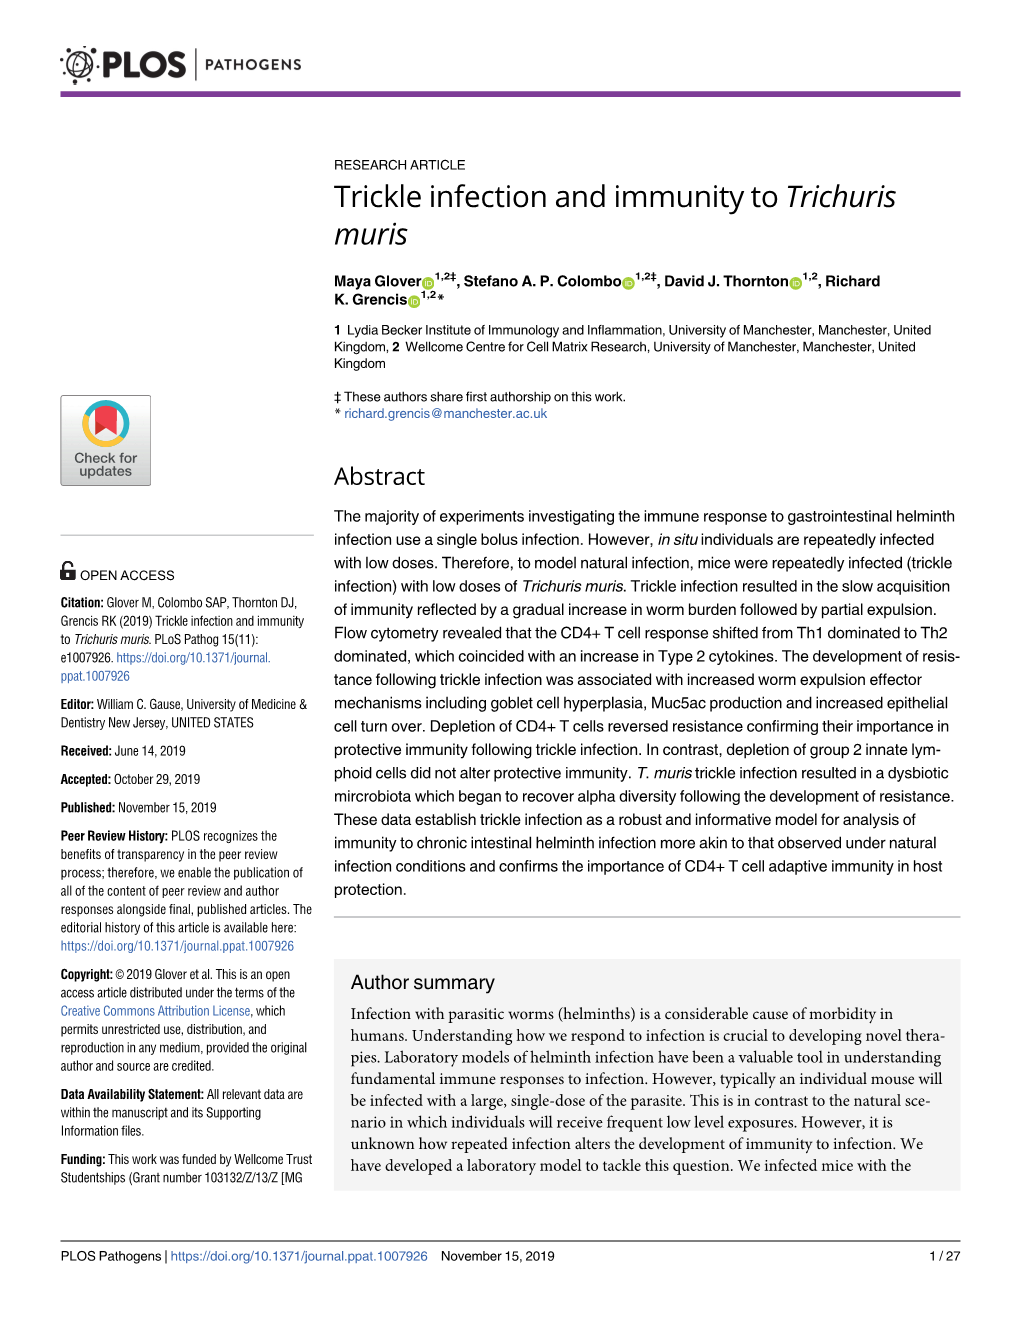 Trickle Infection and Immunity to Trichuris Muris